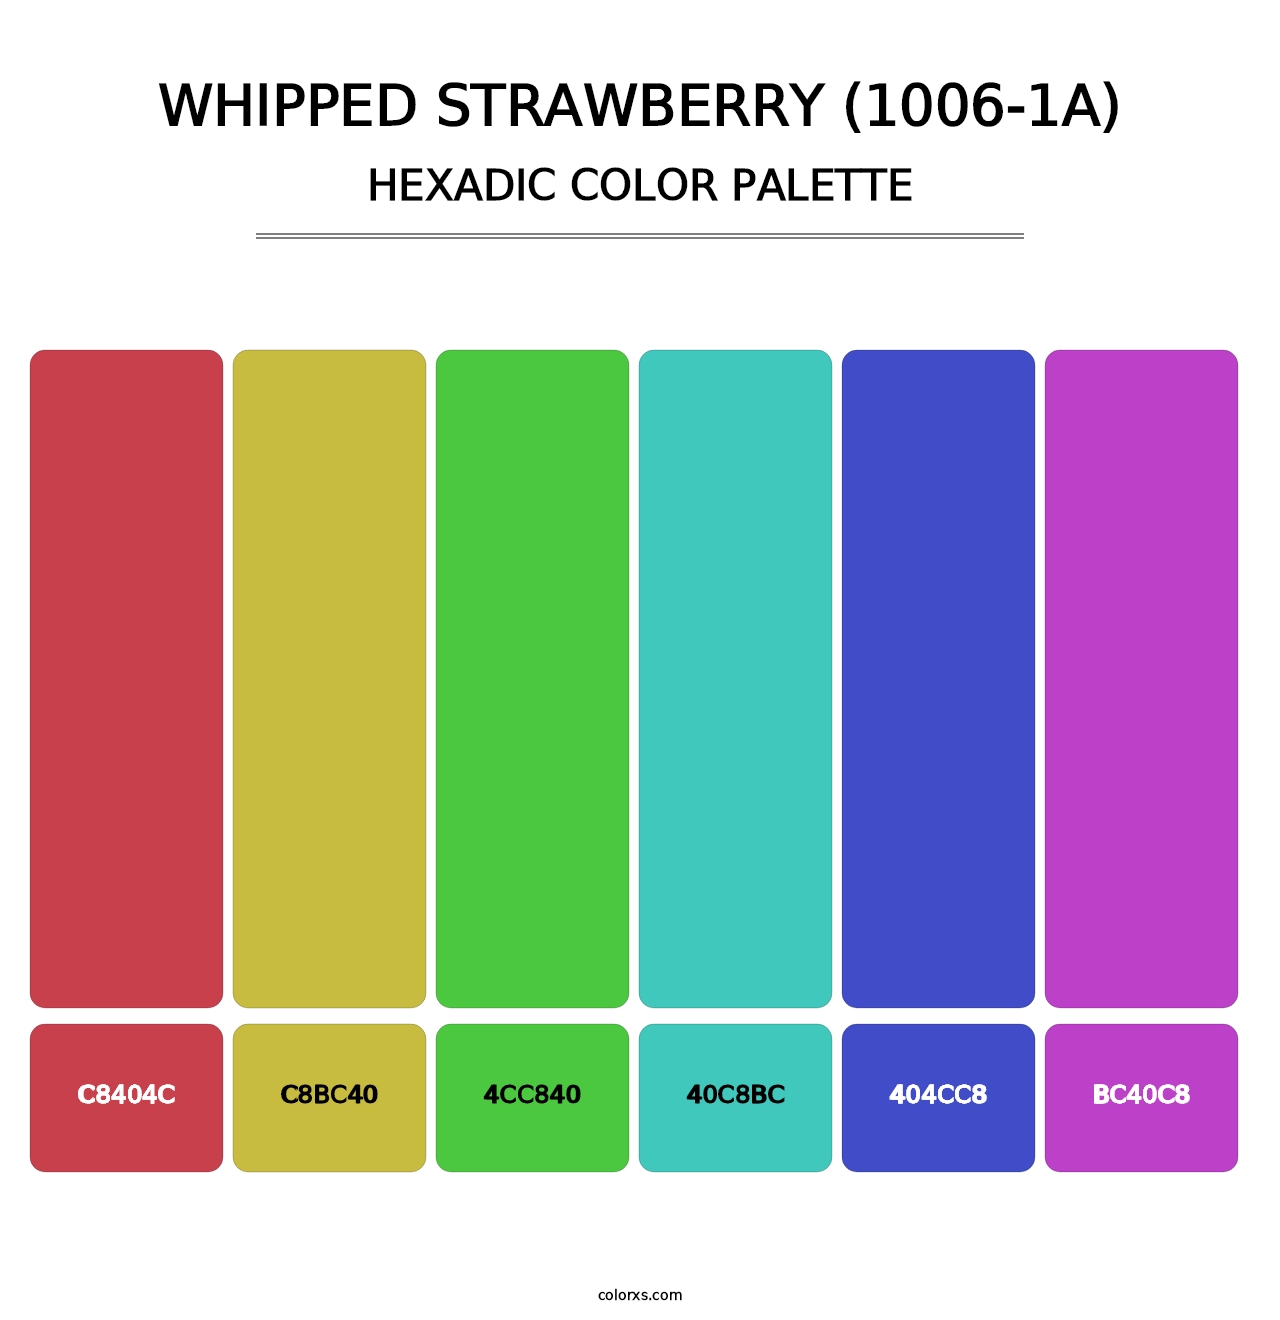 Whipped Strawberry (1006-1A) - Hexadic Color Palette